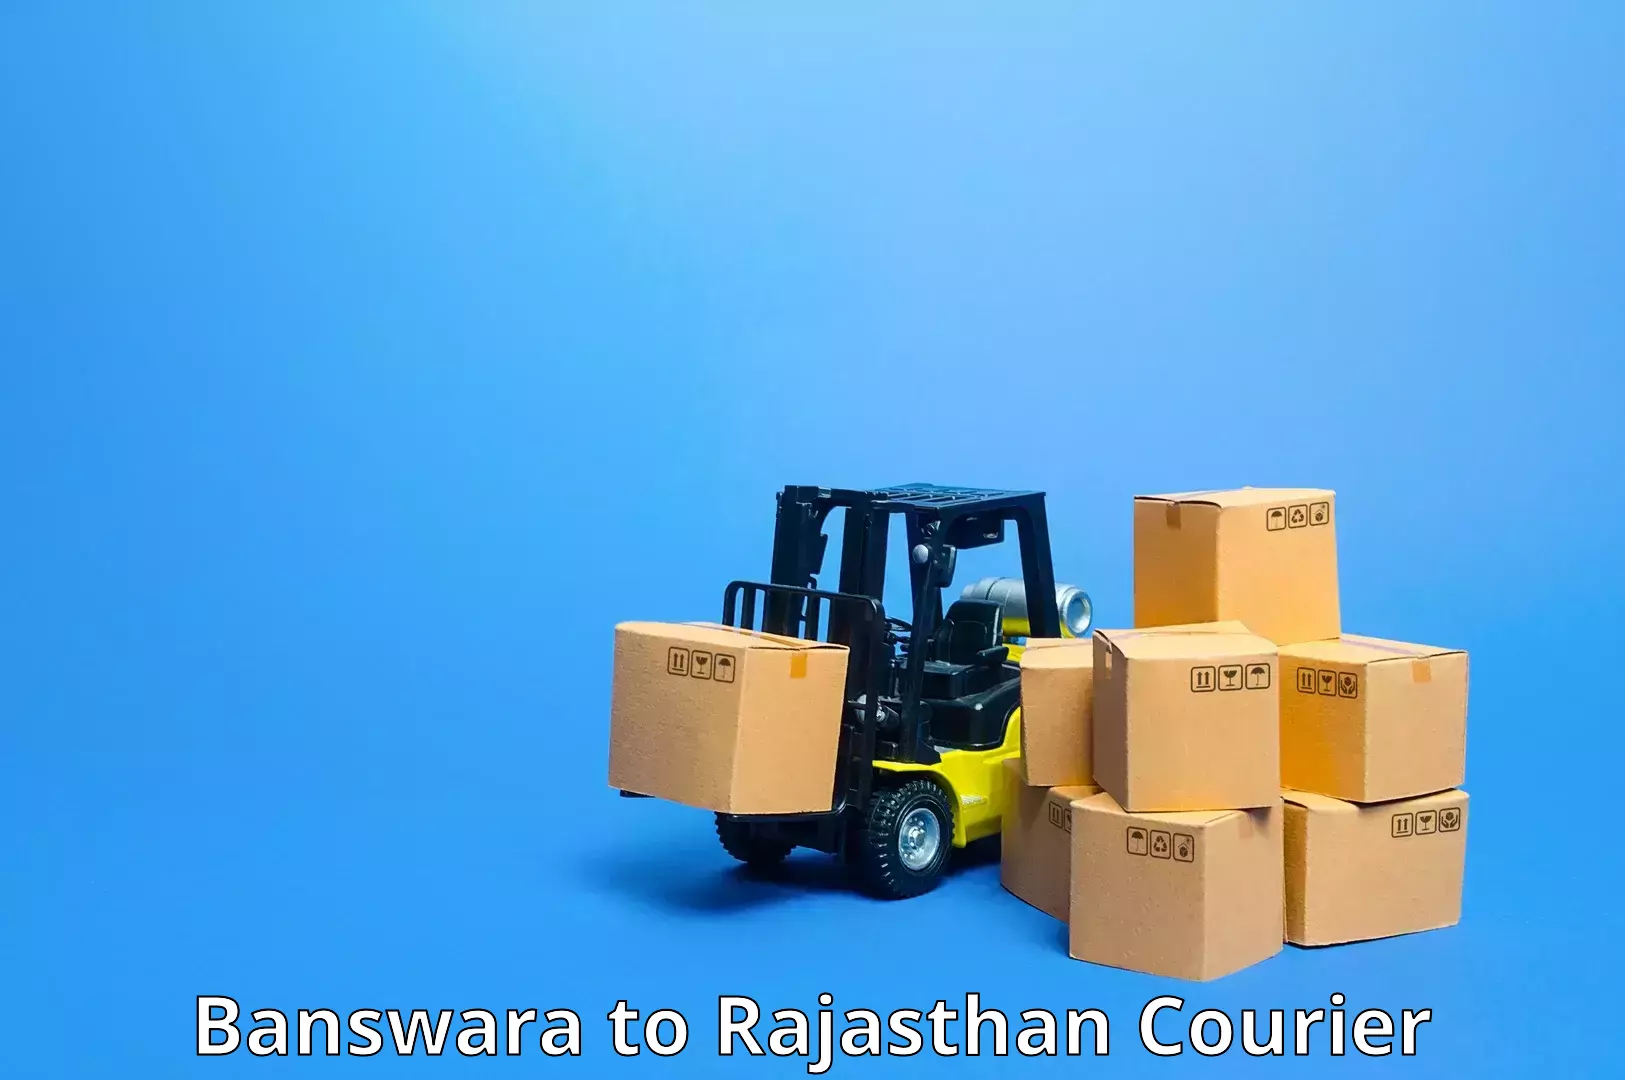 Round-the-clock parcel delivery in Banswara to Ajmer